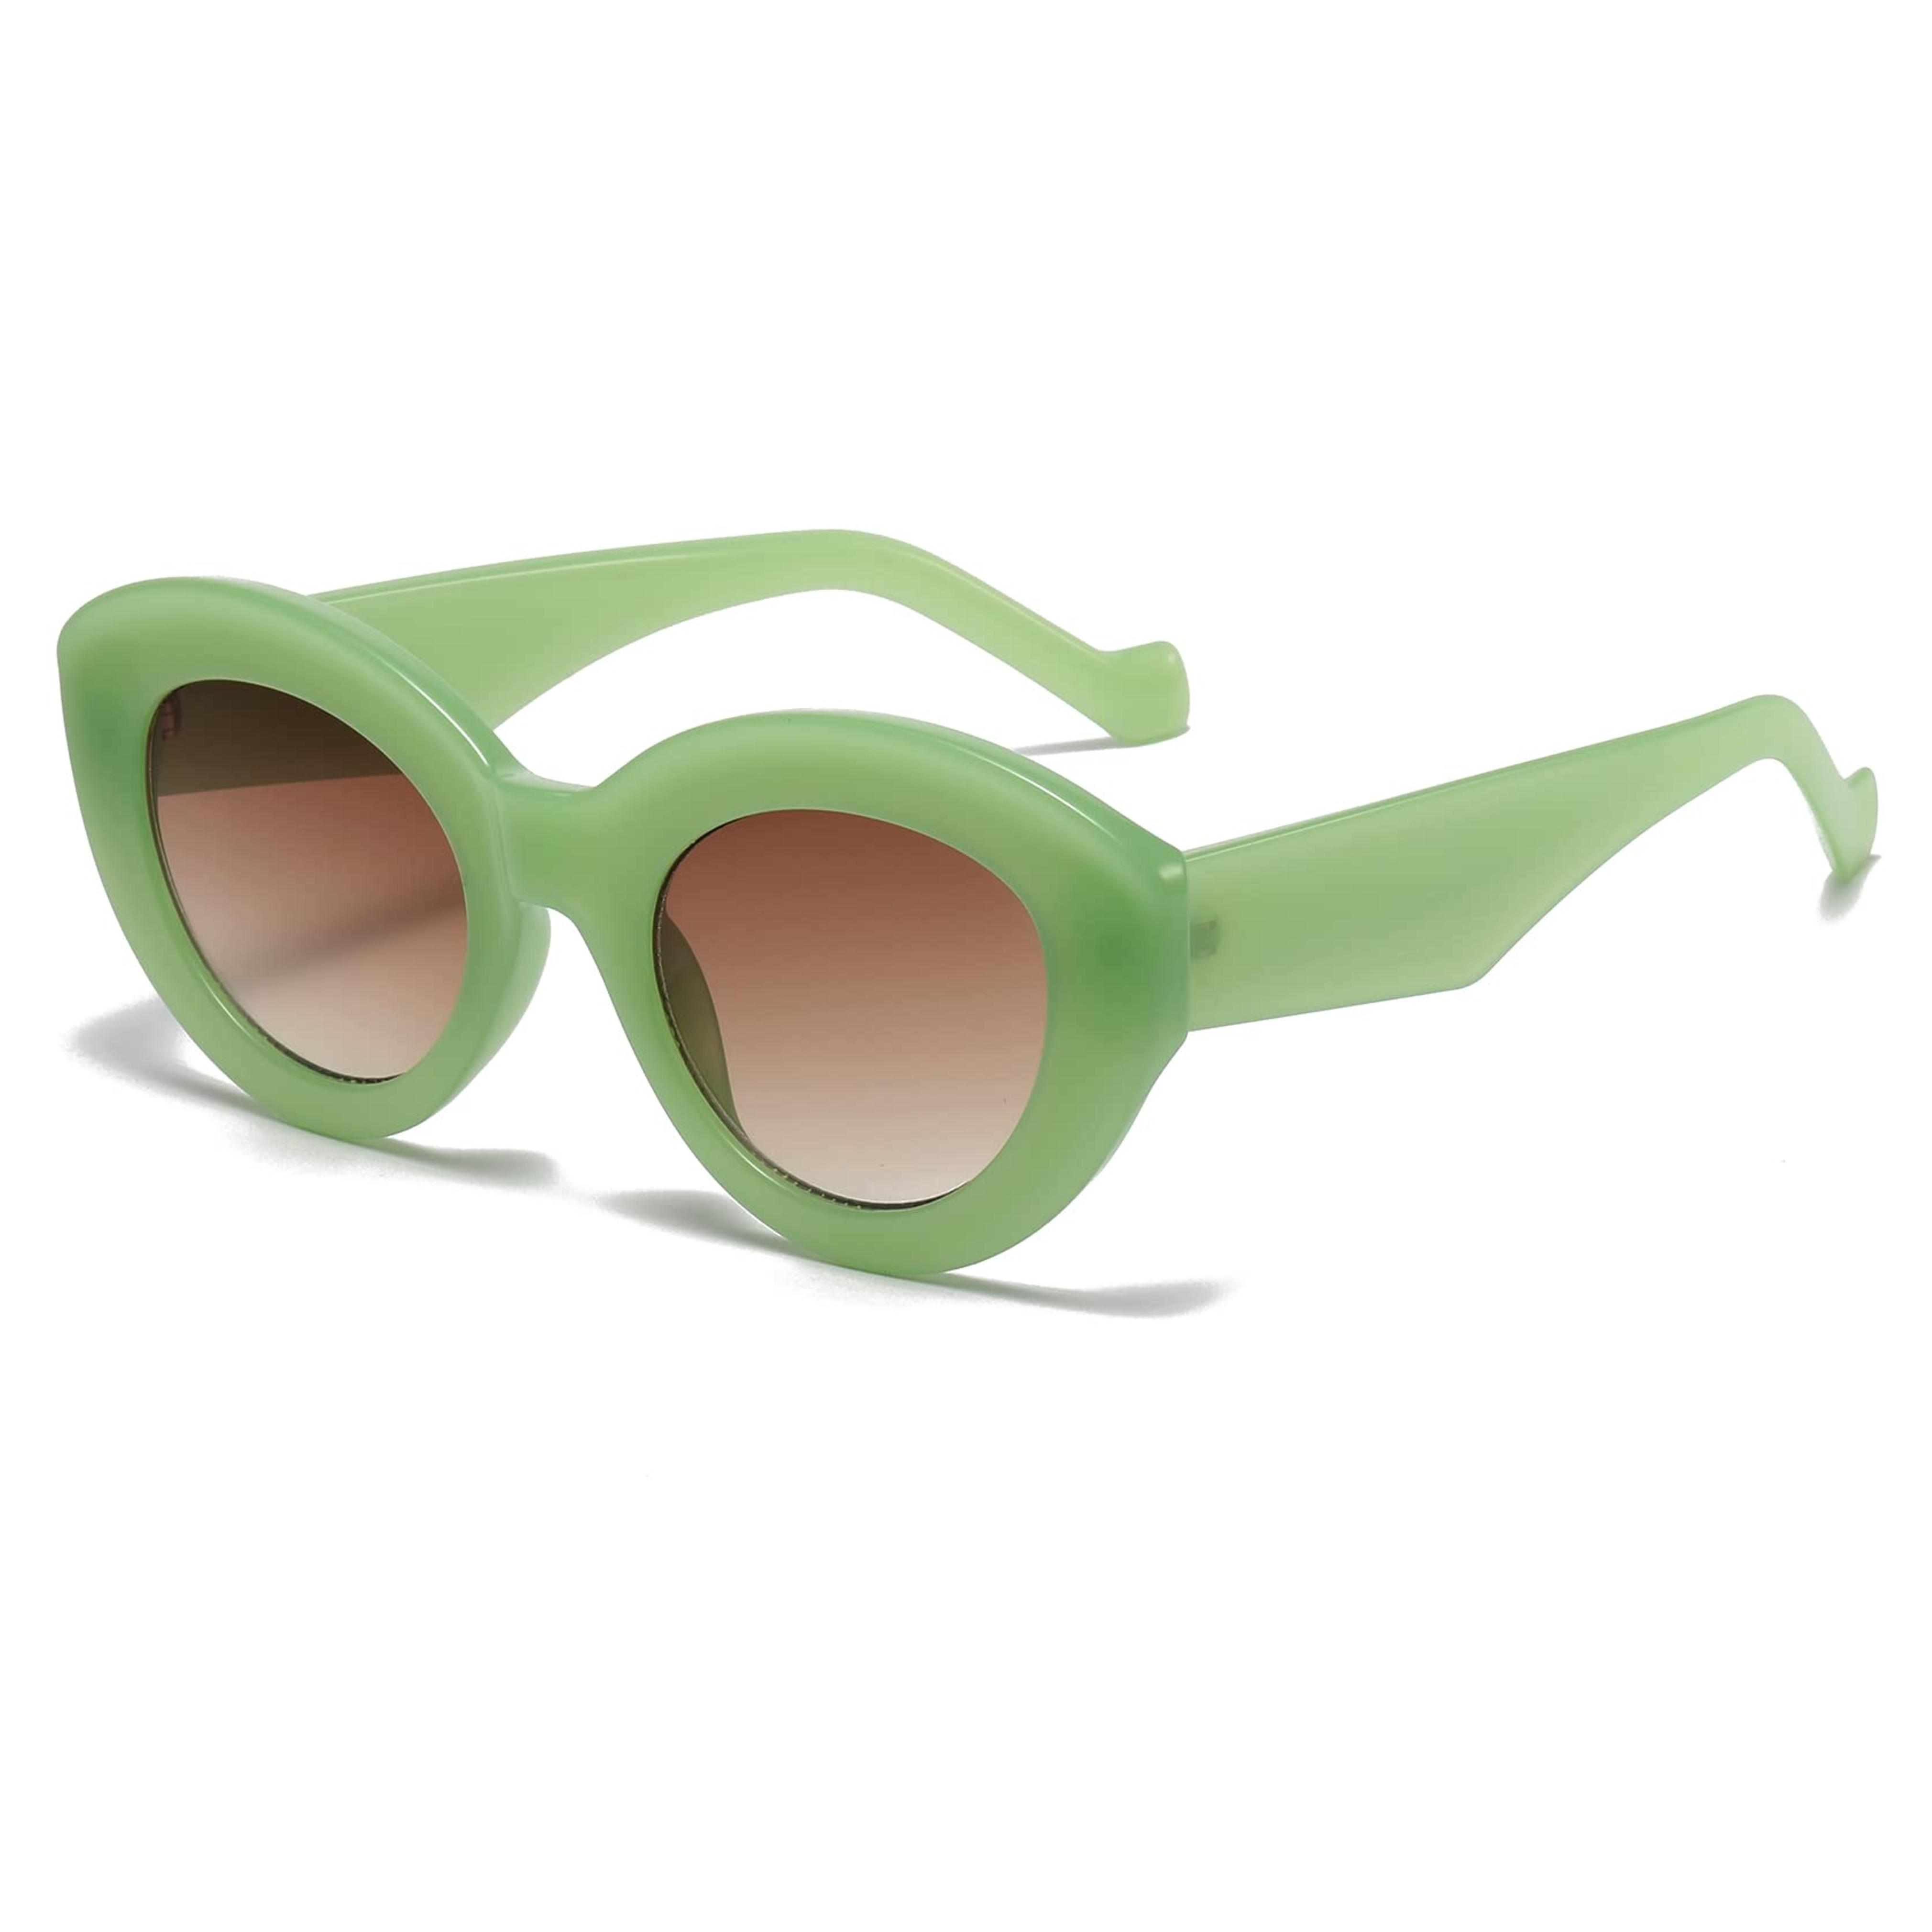 Amazon.com: AIEYEZO Oversized Cat Eye Sunglasses for Women Cute Oval Thick Frame Cateye Sun Glasses Chic Retro Style Shades (Green) : Clothing, Shoes & Jewelry